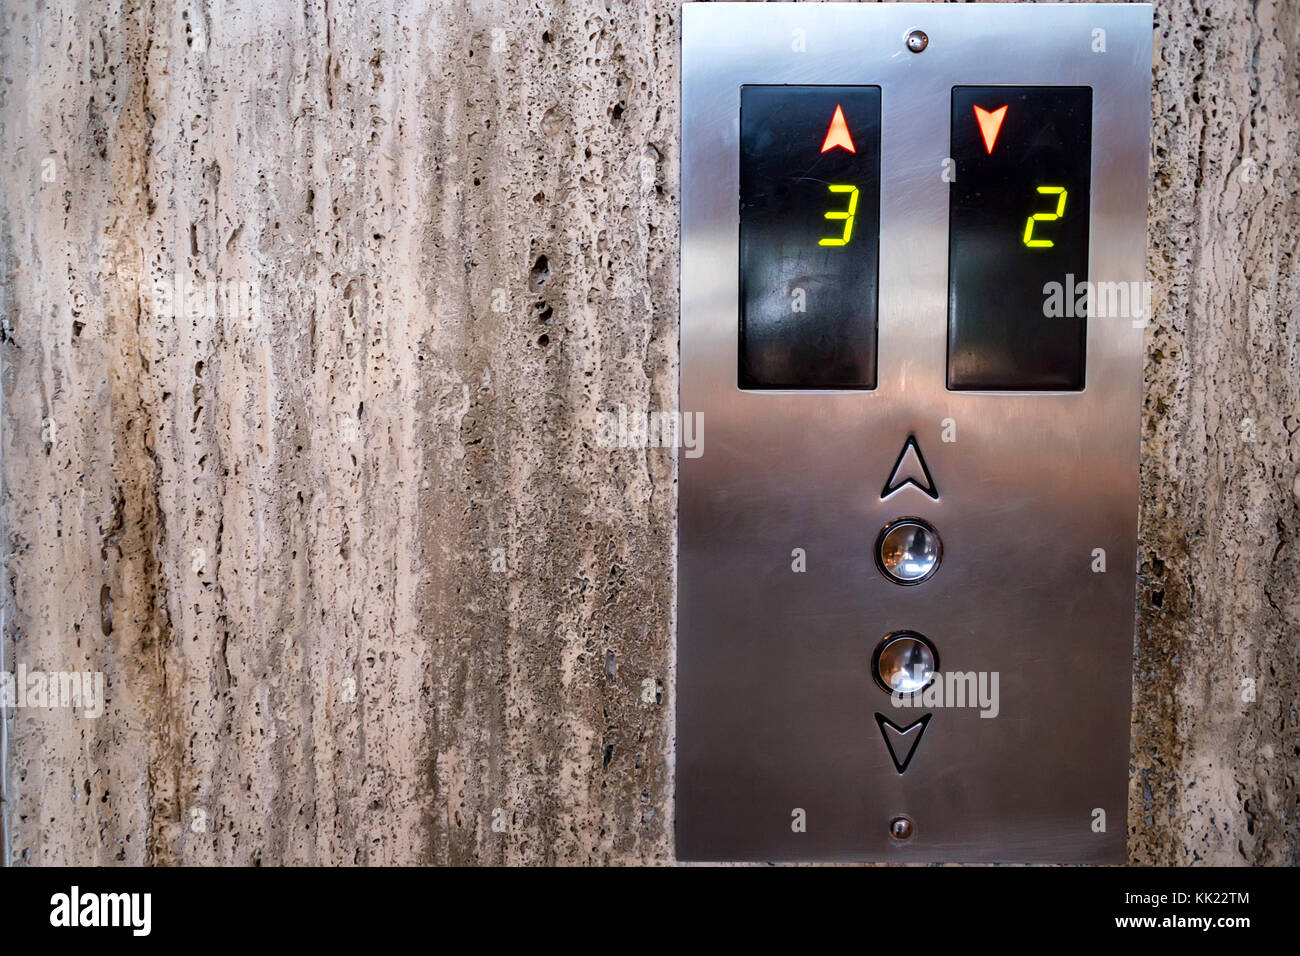 Lift push button panels showing (a) the outside panel with up and down